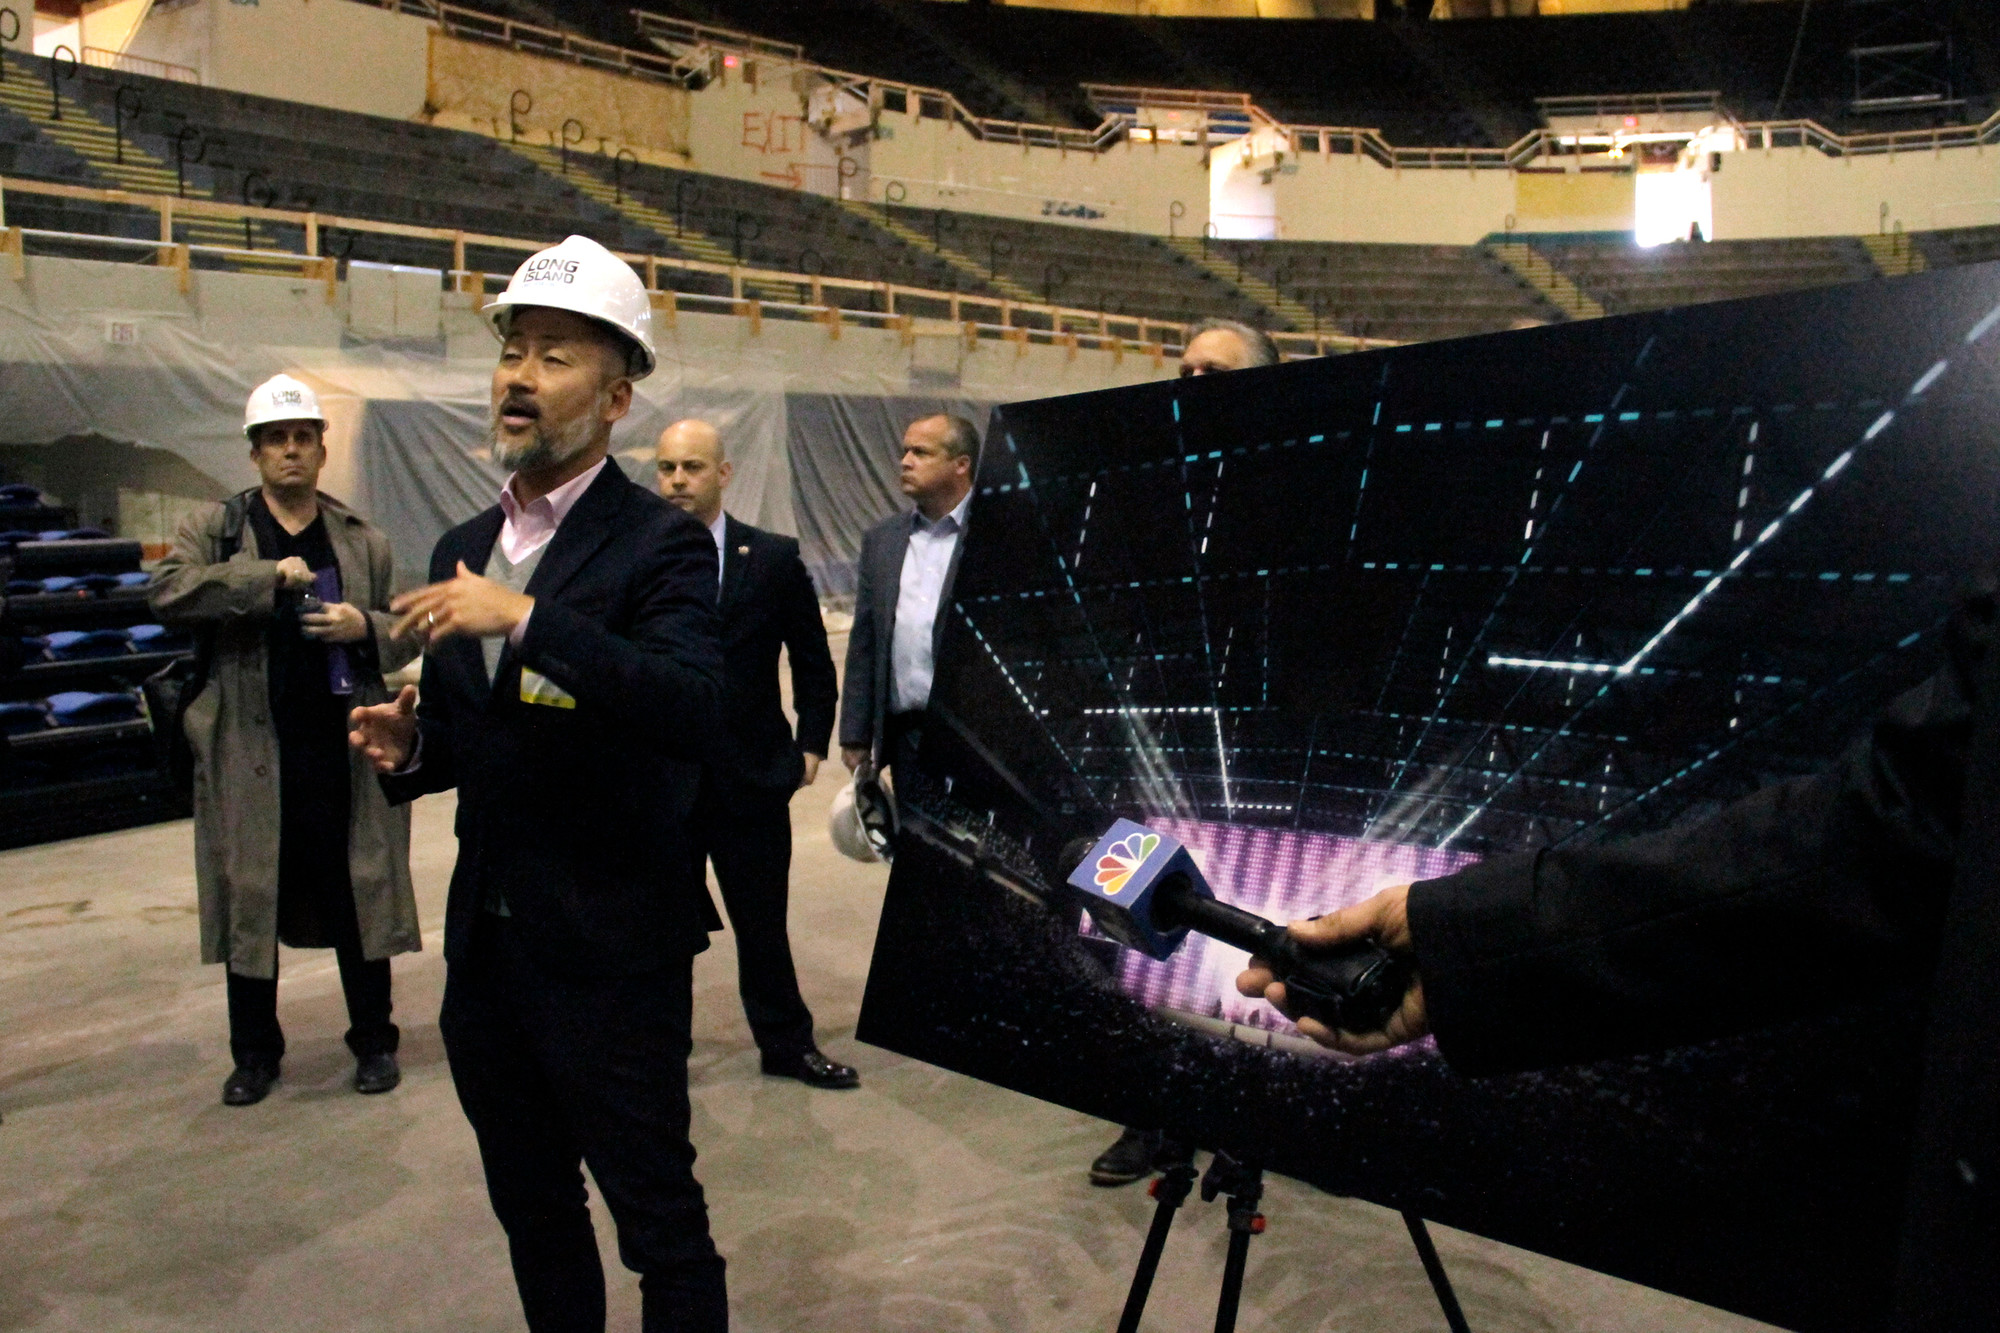 Peter Wang, a design director for Gensler, said the Coliseum’s new lighting system would build excitement at concerts and other events.